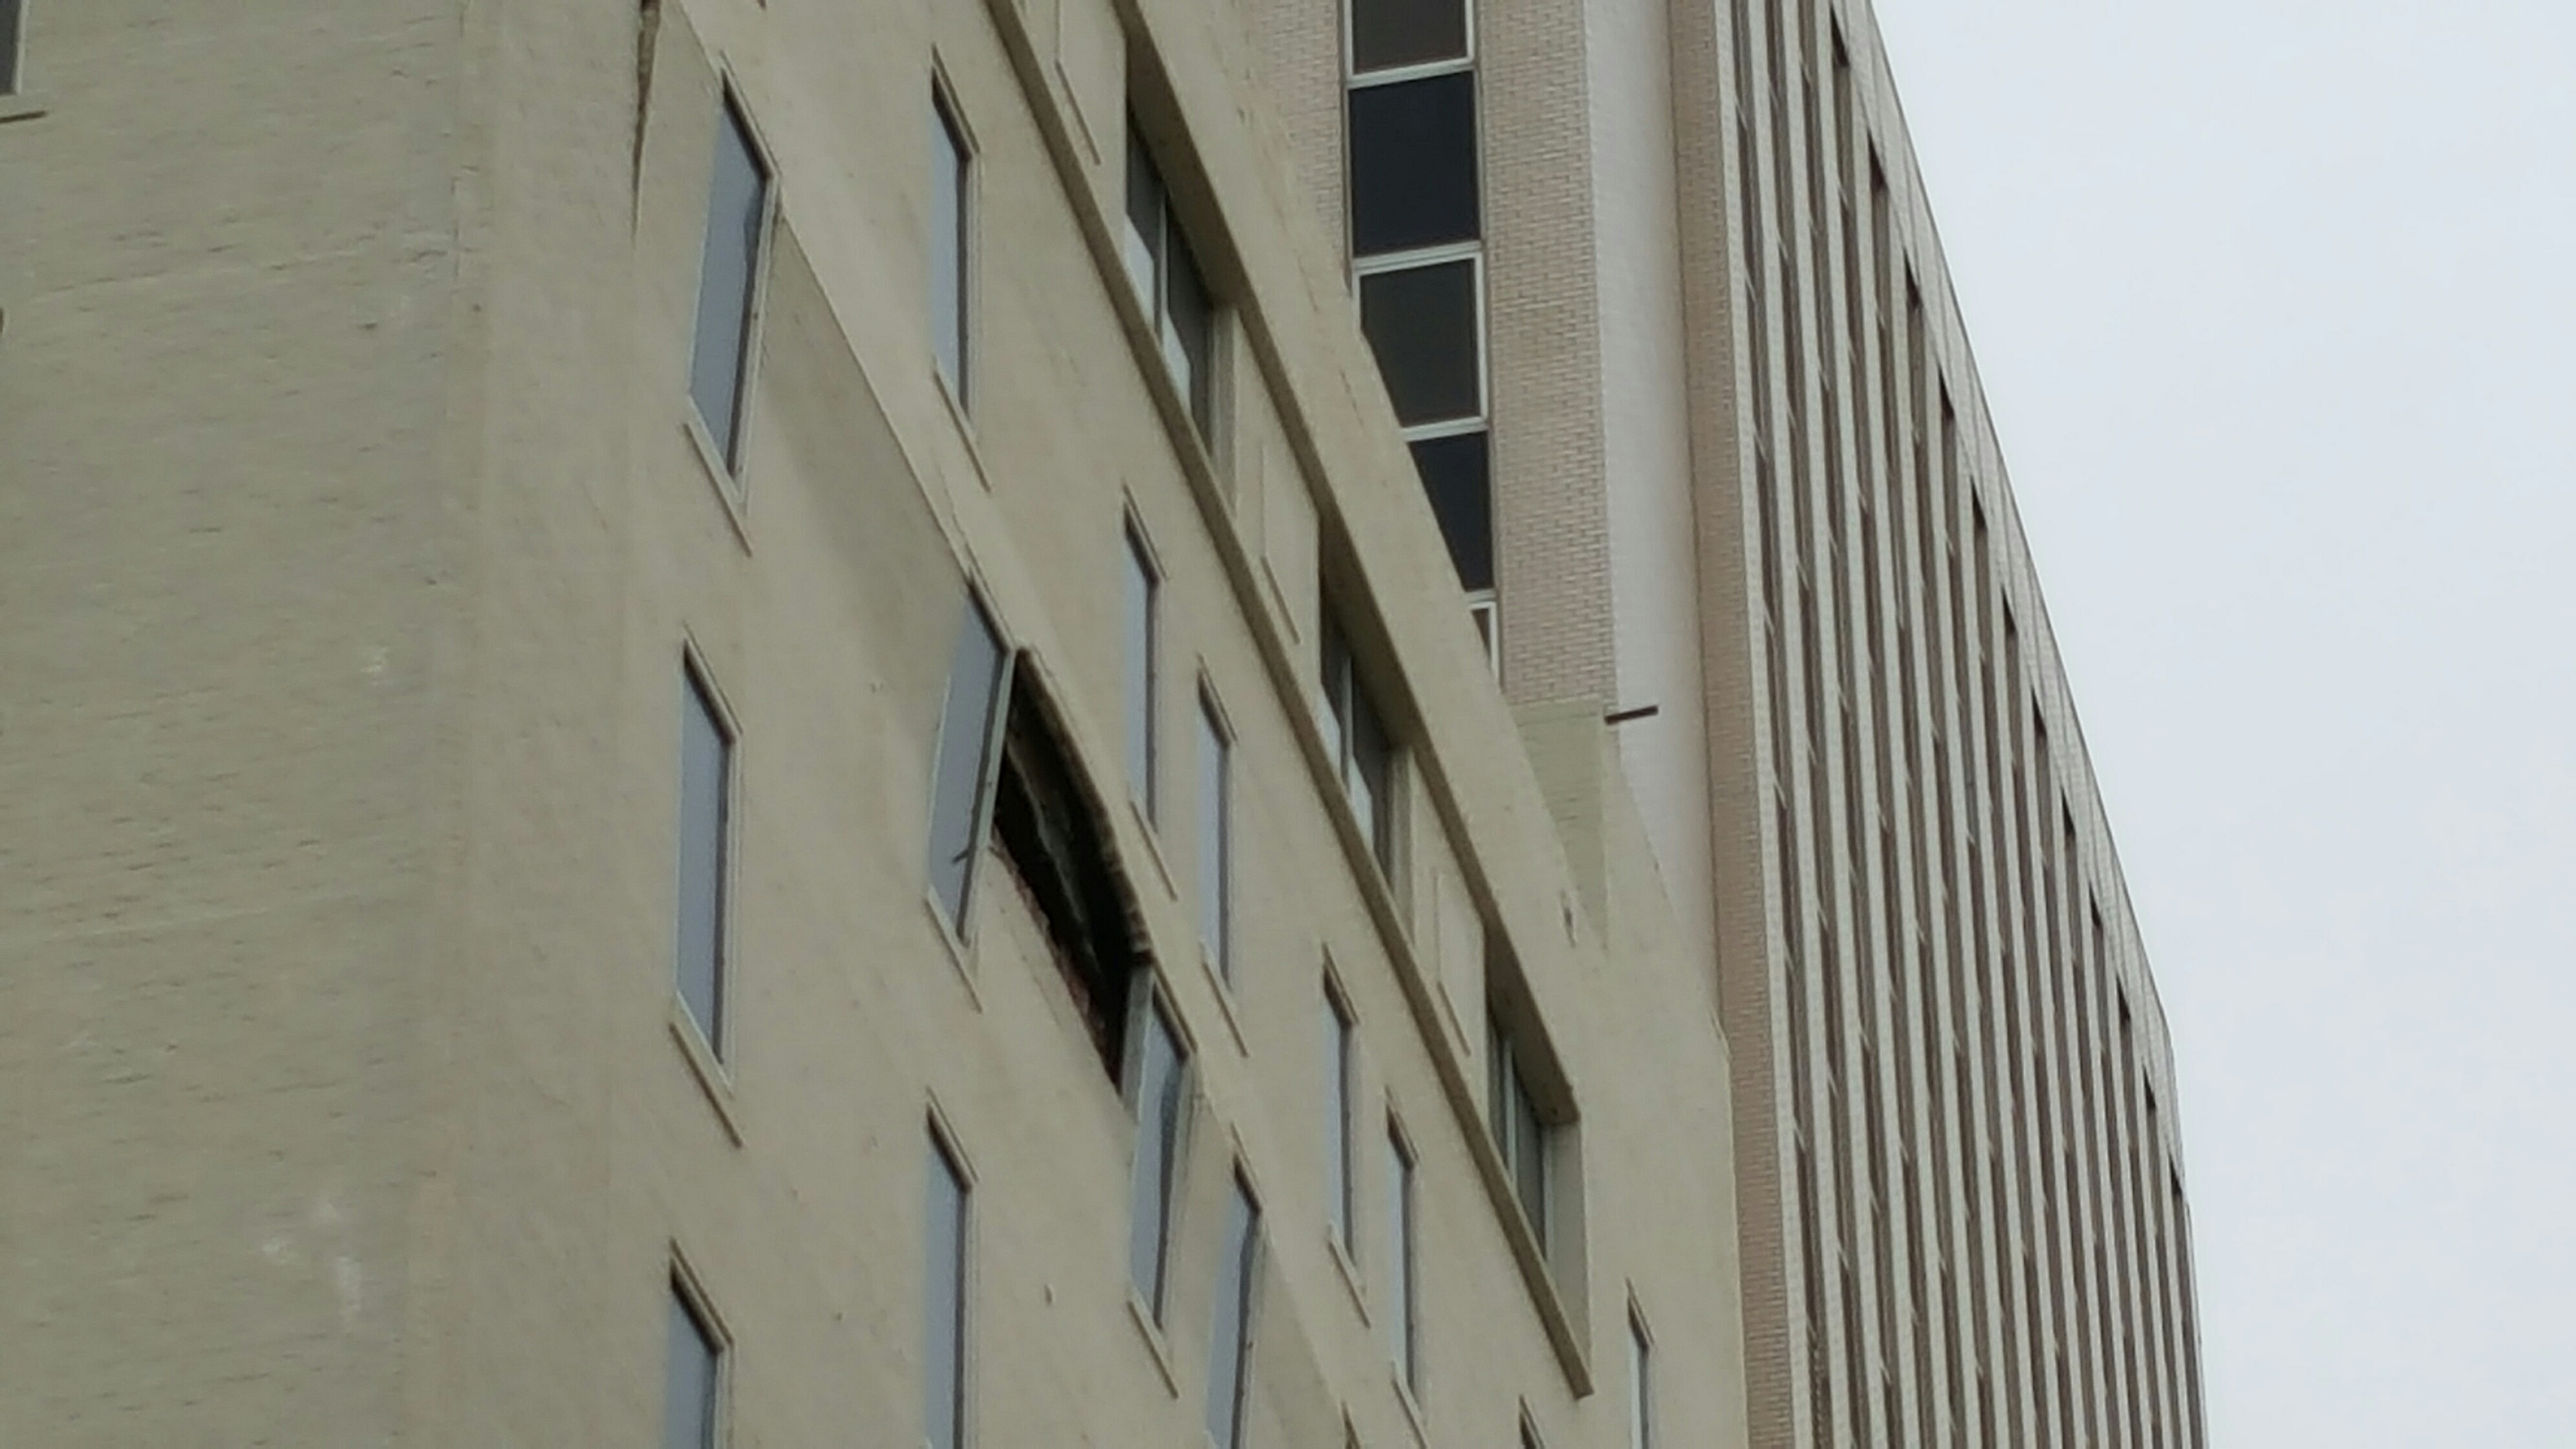 Larger section of wall collapses on downtown Birmingham building, bricks fall 9 stories